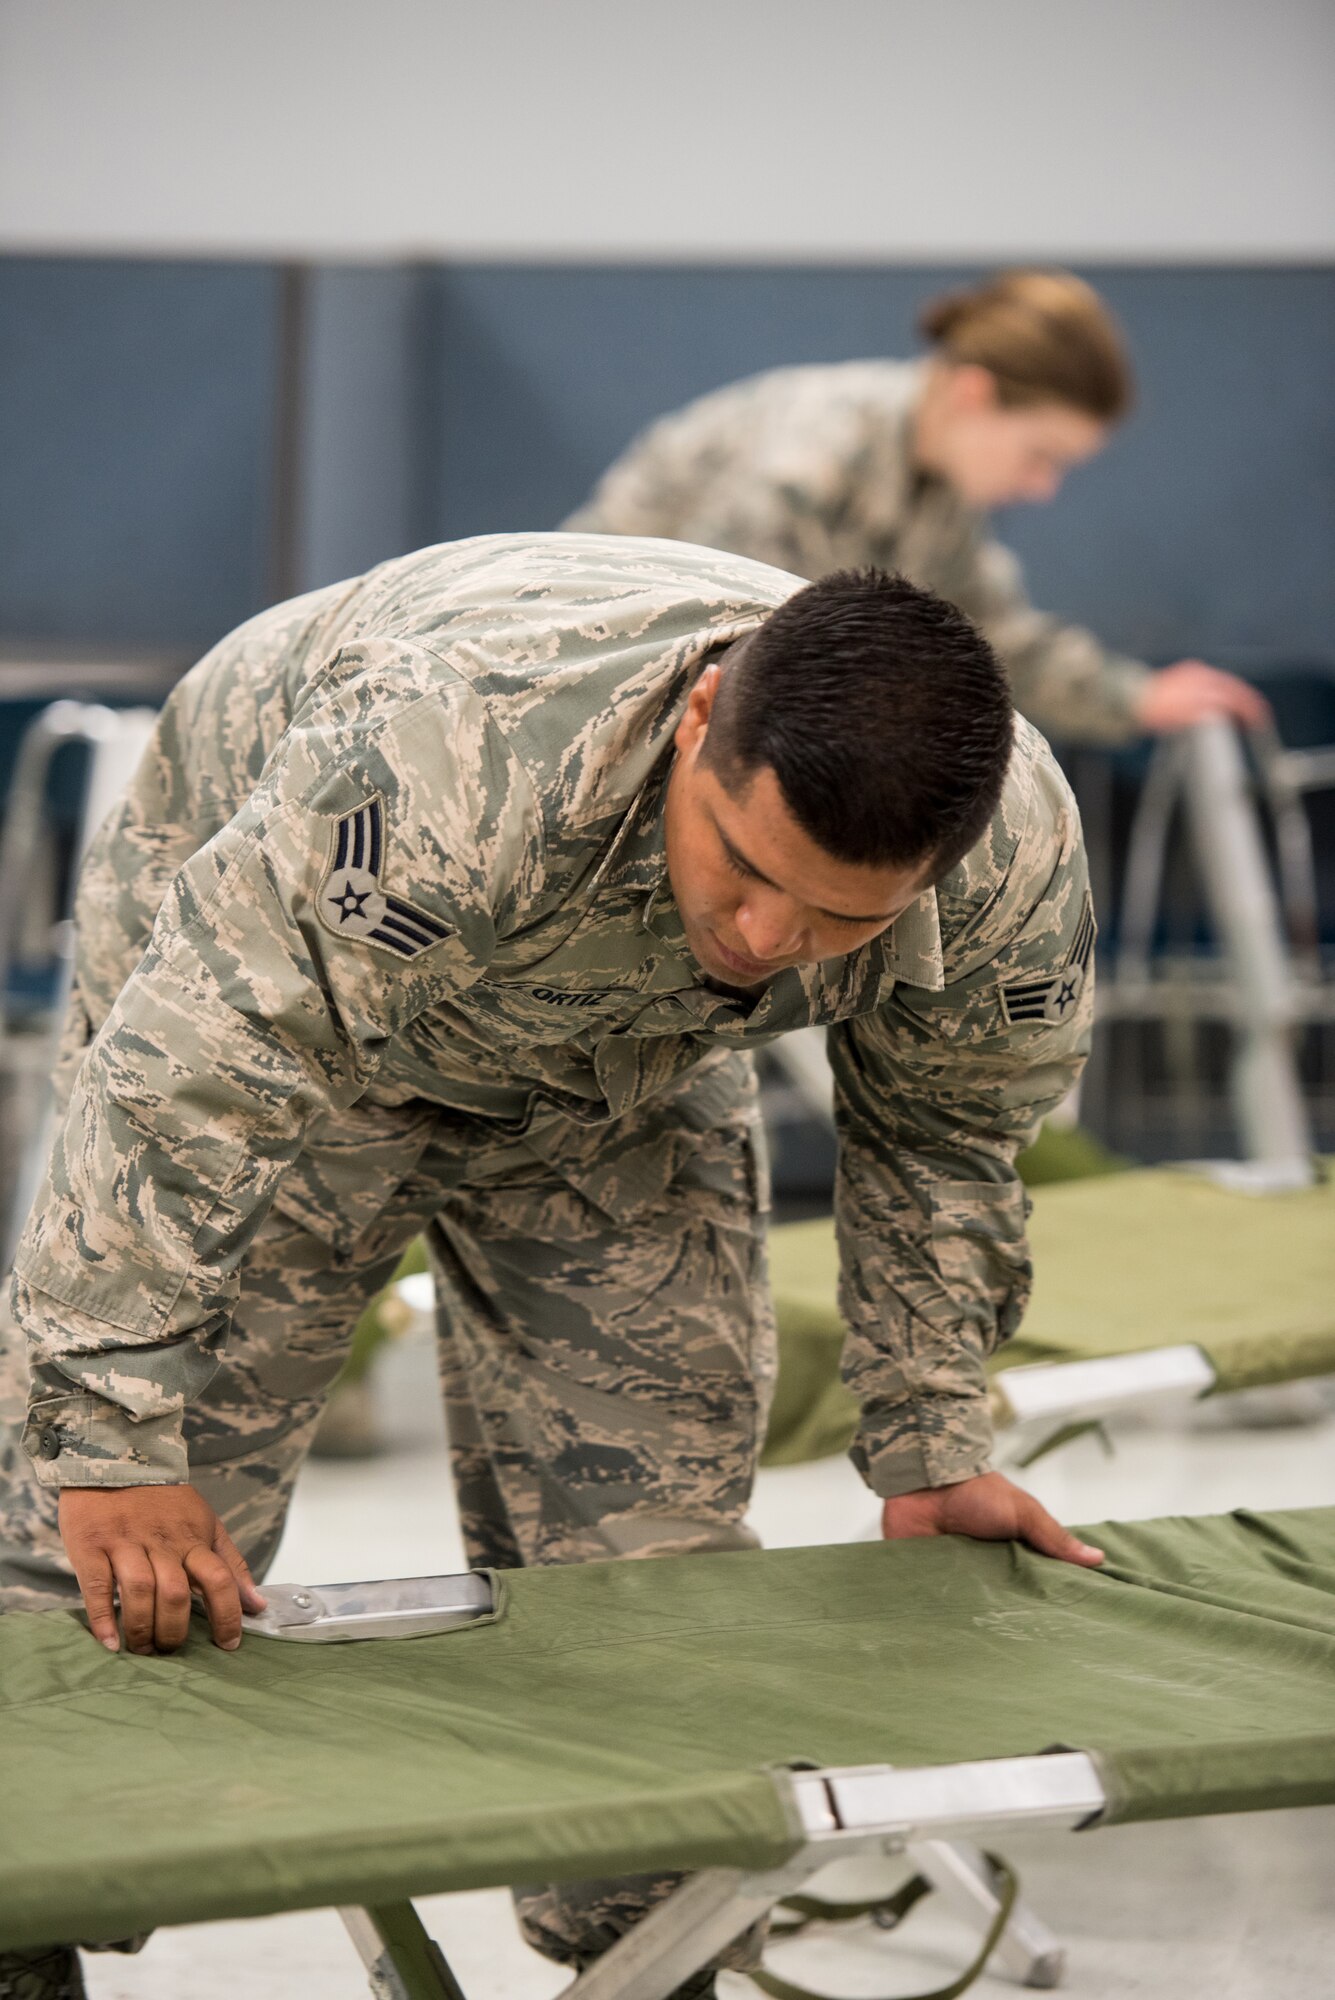 Senior Airman Nanstacio Perez-Ortiz, a food services specialist for the New Jersey Air National Guard's 108th Force Support Squadron, sets up cots for incoming military members at Graves County High School in Mayfield, Ky., July 15, 2016, in preparation for Bluegrass Medical Innovative Readiness Training. The program will offer medical and dental care at no cost to residents in three Western Kentucky locations from July 18 to 27. (U.S. Air National Guard photo by Master Sgt. Phil Speck)